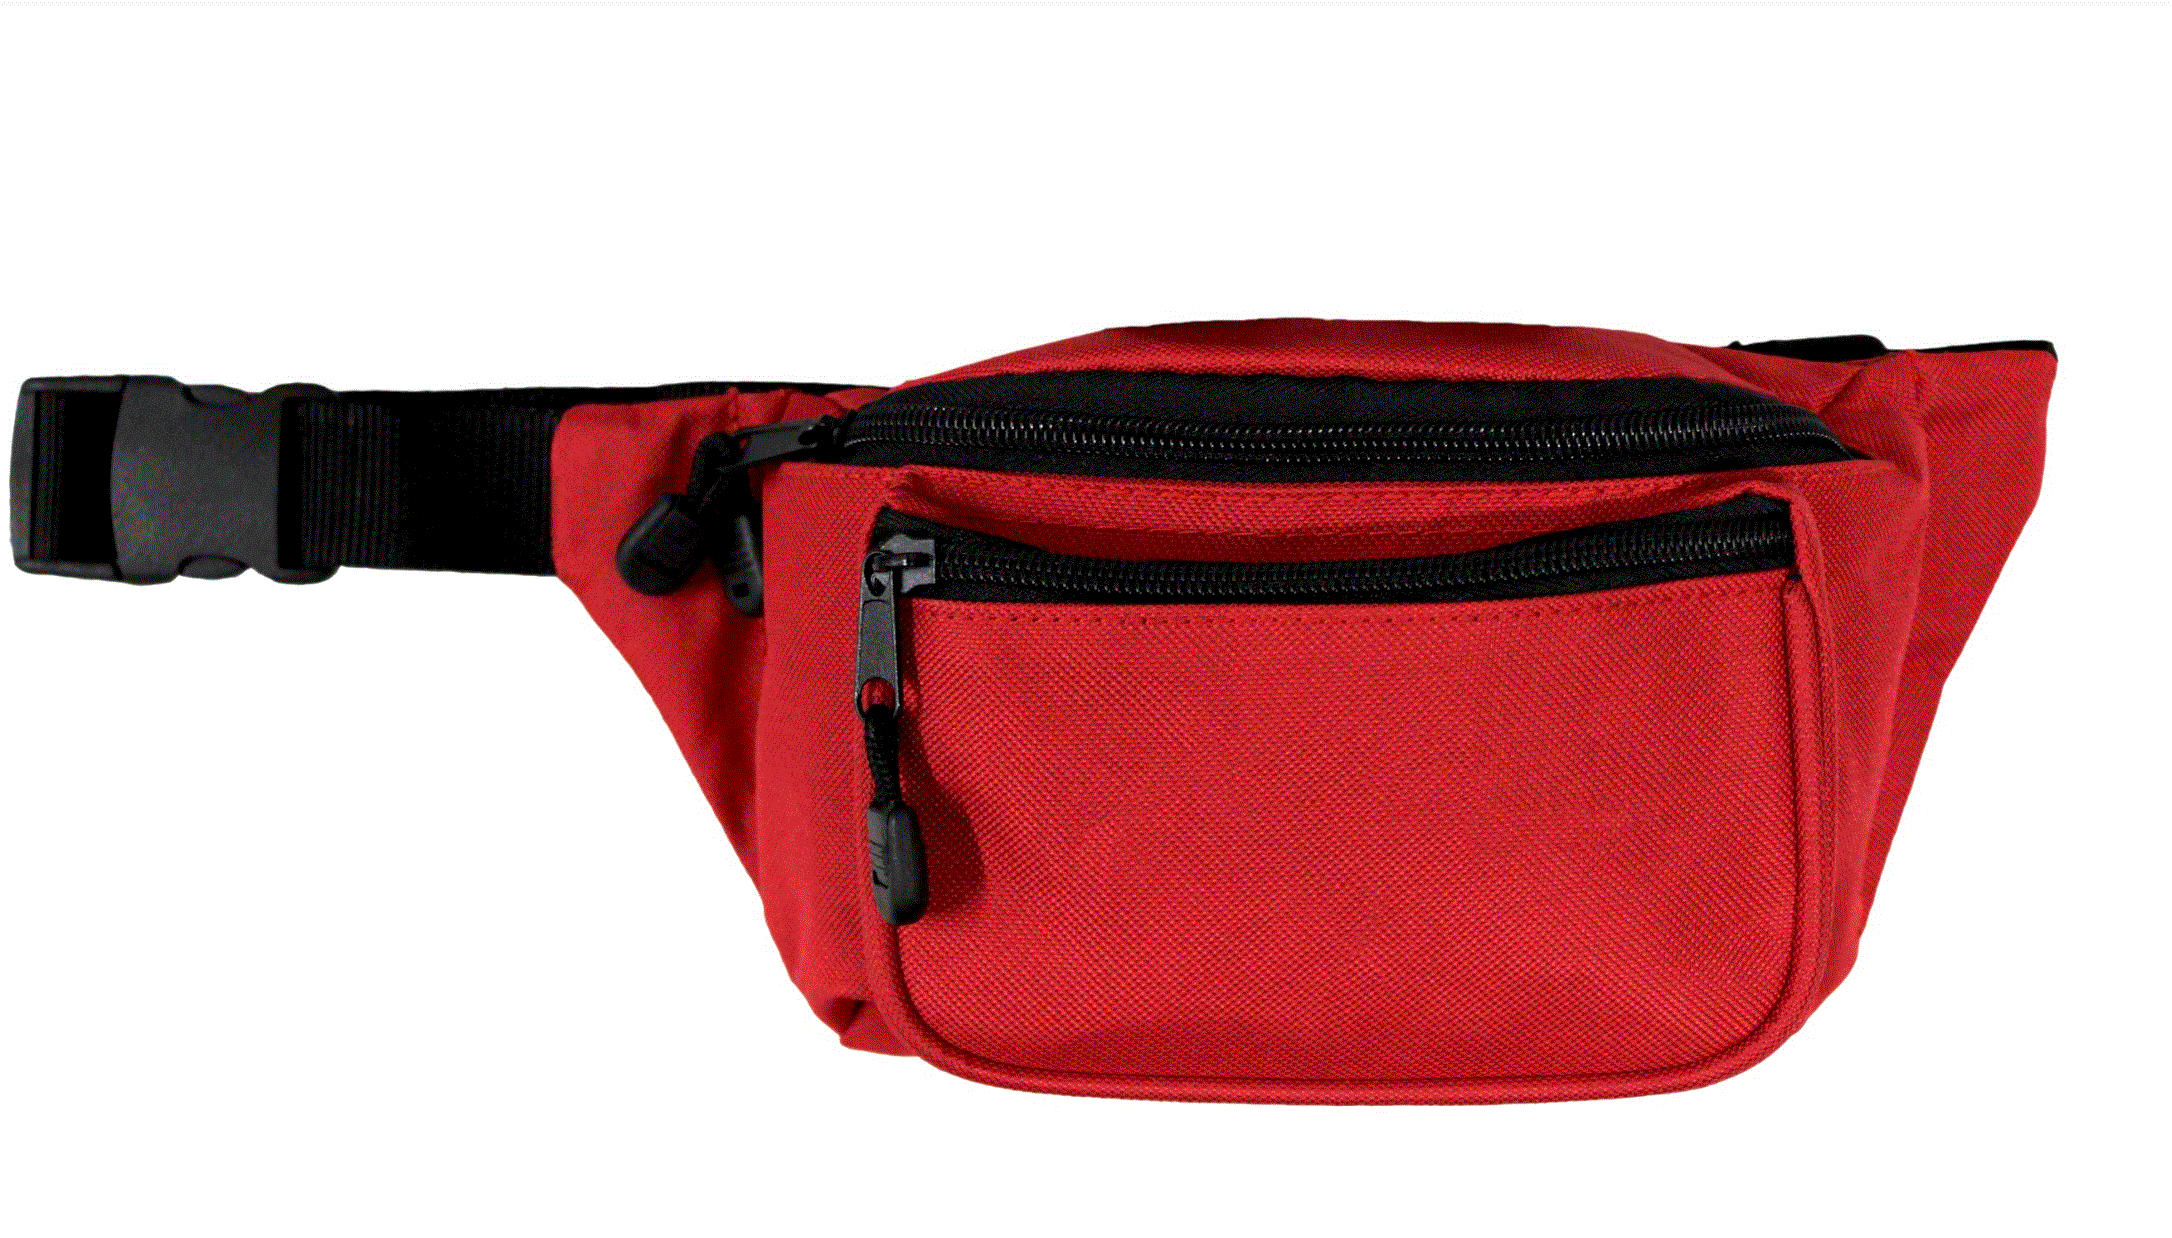 Kemp USA Fanny Pack, with No Logo, Red $7.25/Each Kemp USA 10-103-RED-NL